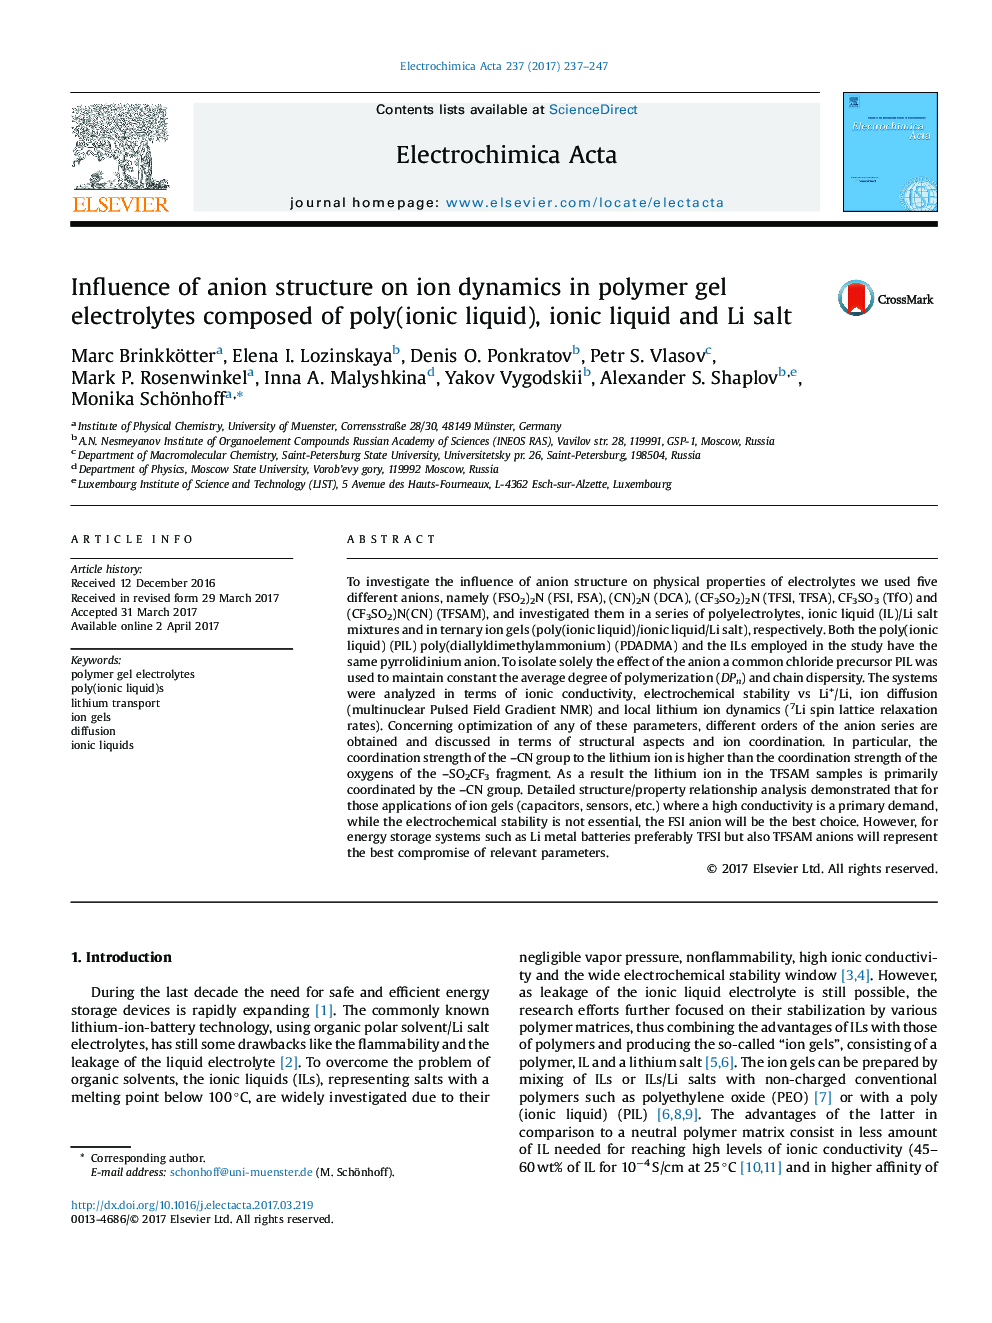 Influence of anion structure on ion dynamics in polymer gel electrolytes composed of poly(ionic liquid), ionic liquid and Li salt